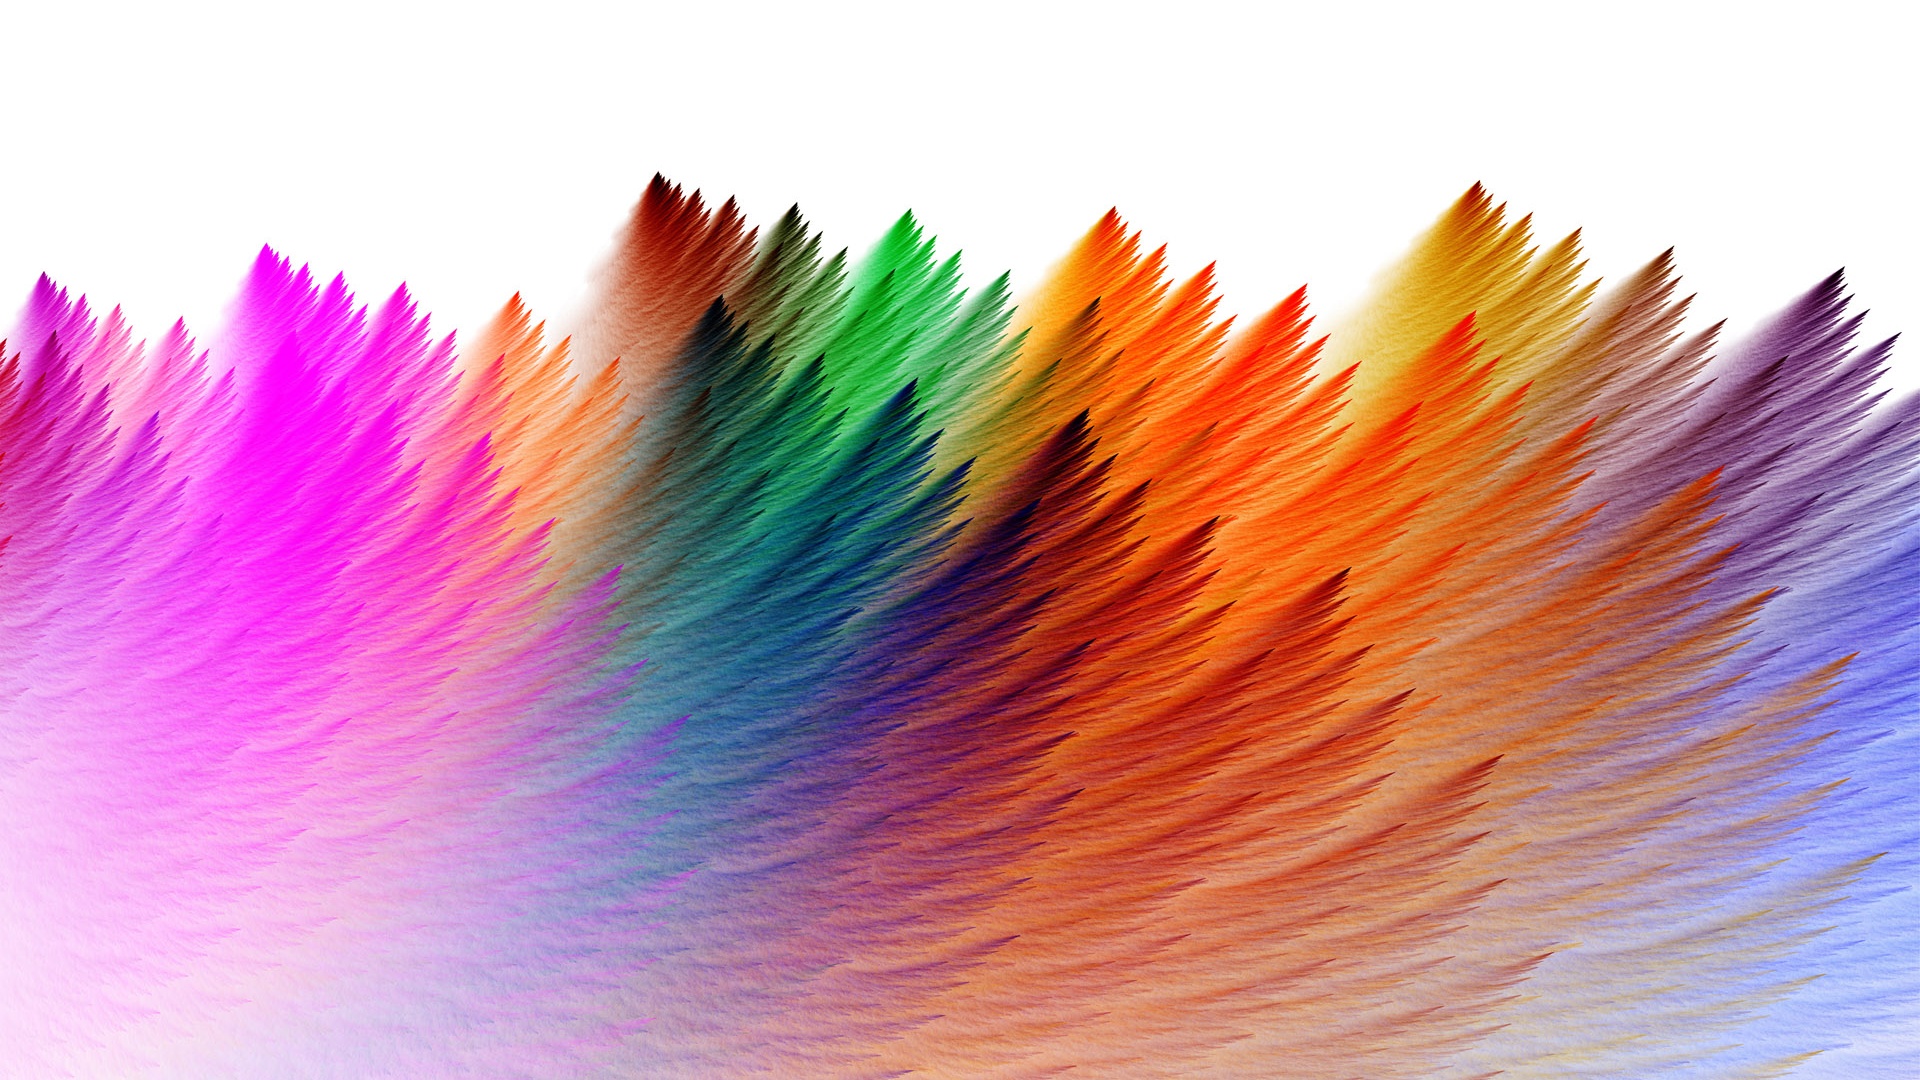 Colorful Feathers Abstract